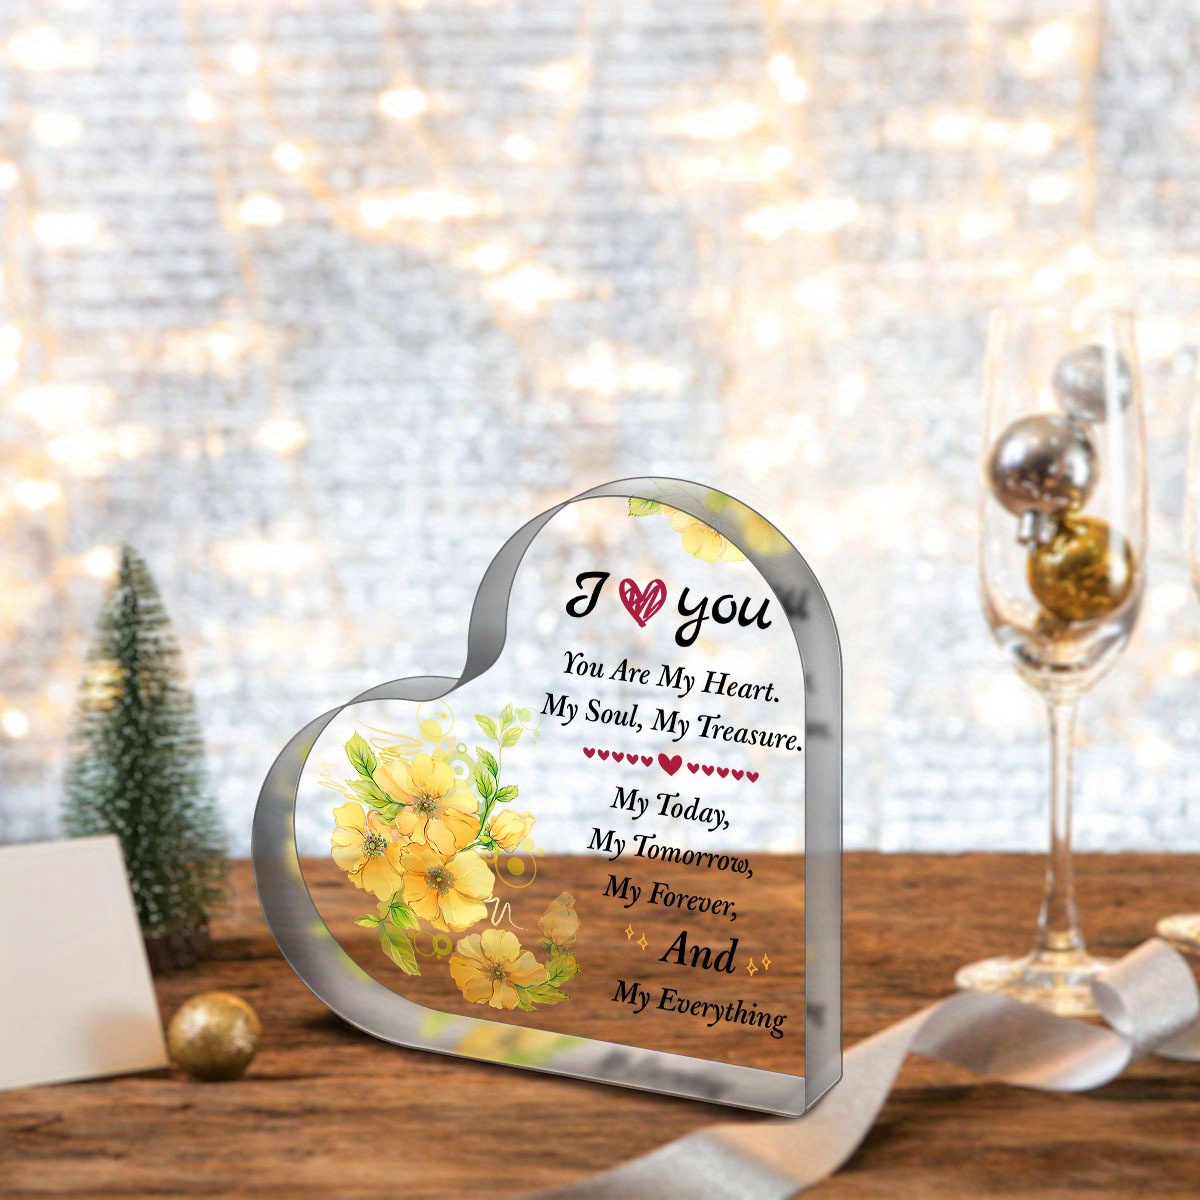 1pc Cute Gifts For Girlfriends, Girlfriend Birthday Gifts From Boyfriend,  Unique Acrylic Plaque With Love Quotes, Romantic Girlfriend Gift For Birthda